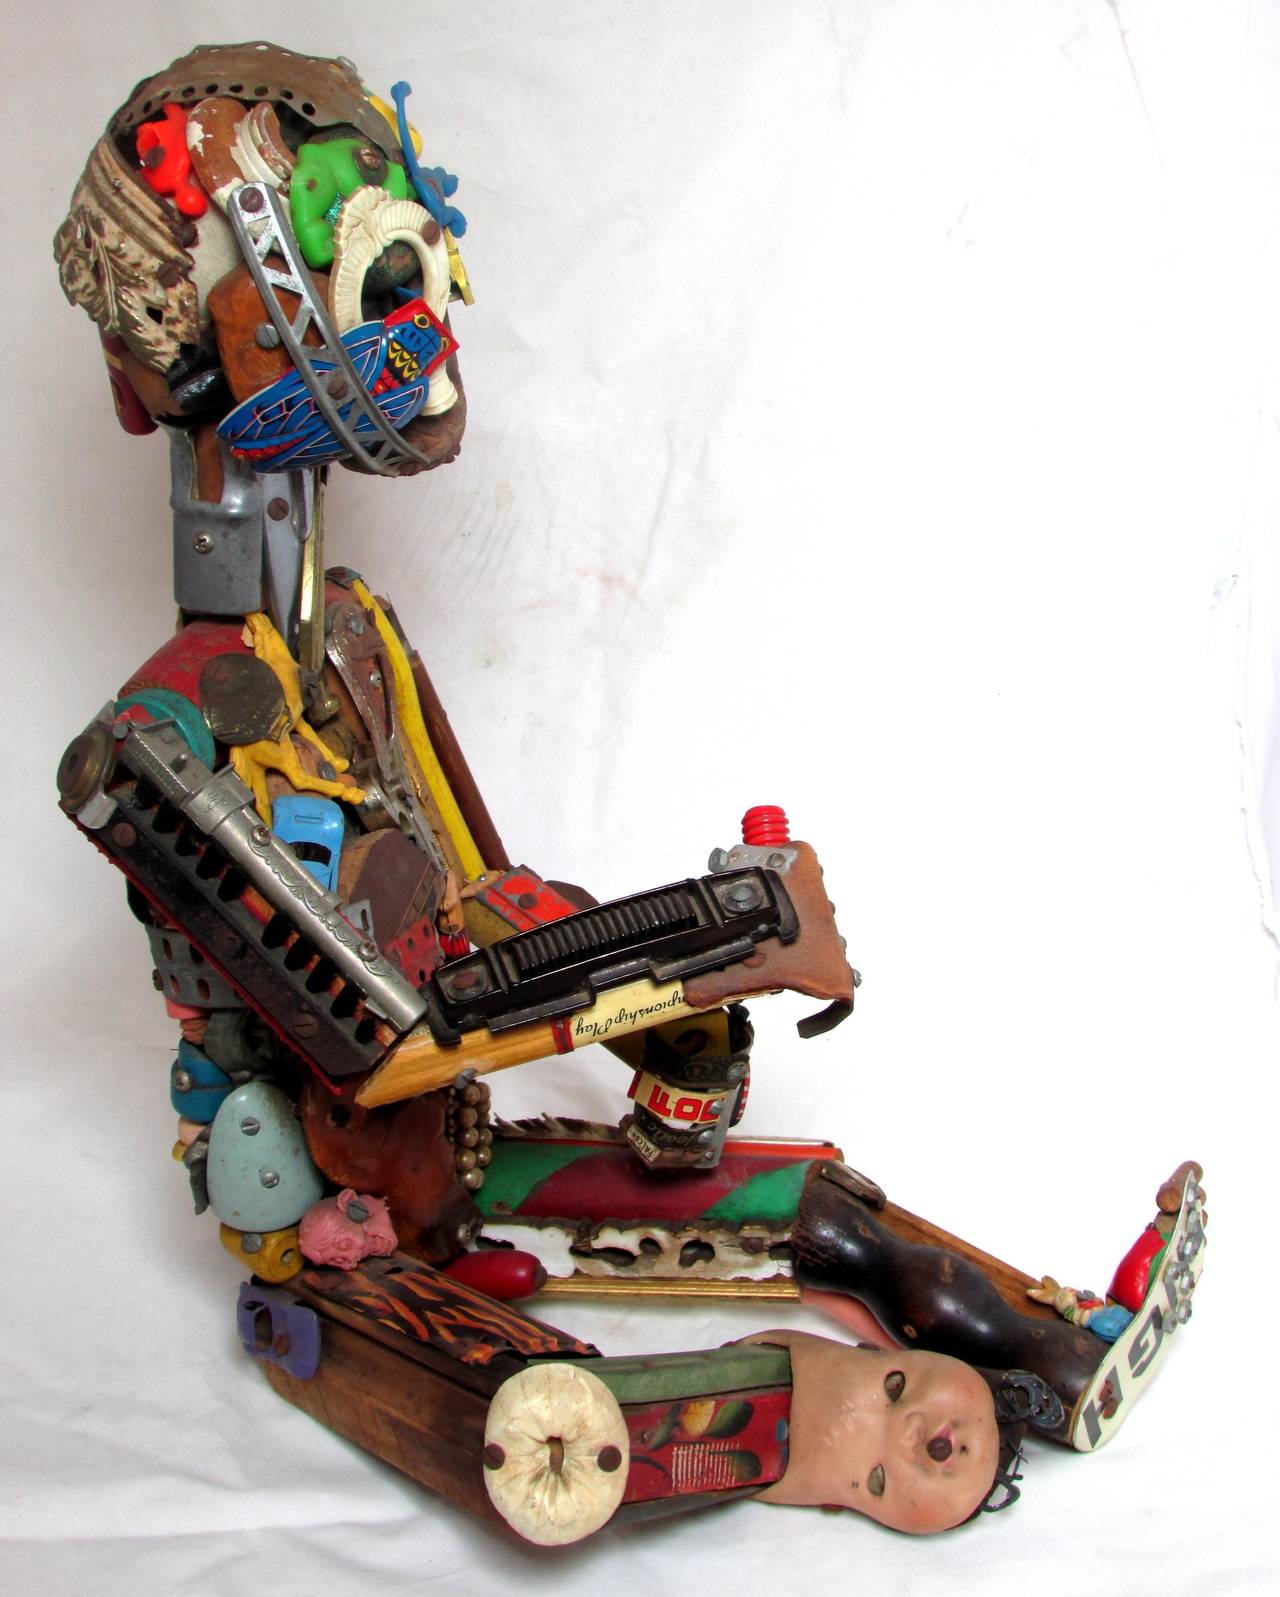 Lifesize sculpture of a baby made with found objects by Philadelphia sculptor Leo Sewell (b 1945)